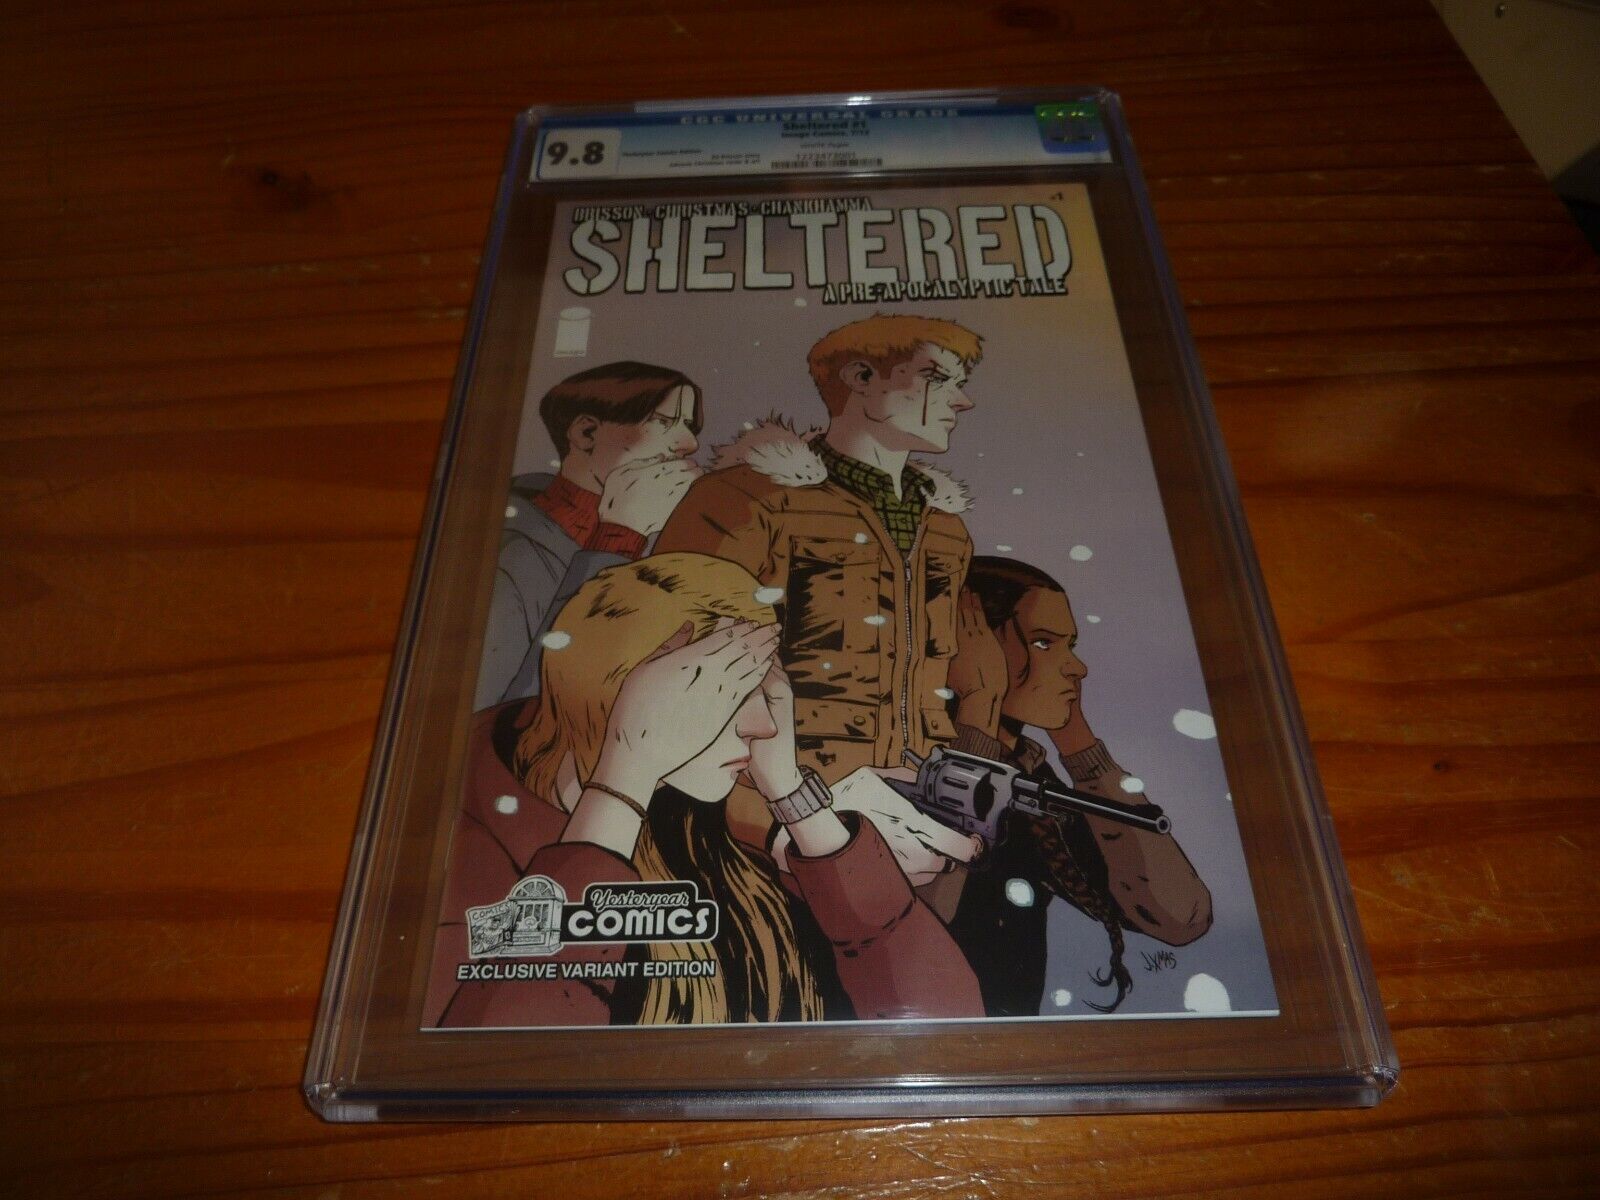 SHELTERED #1 Yesteryear Comics Variant CGC 9.8 